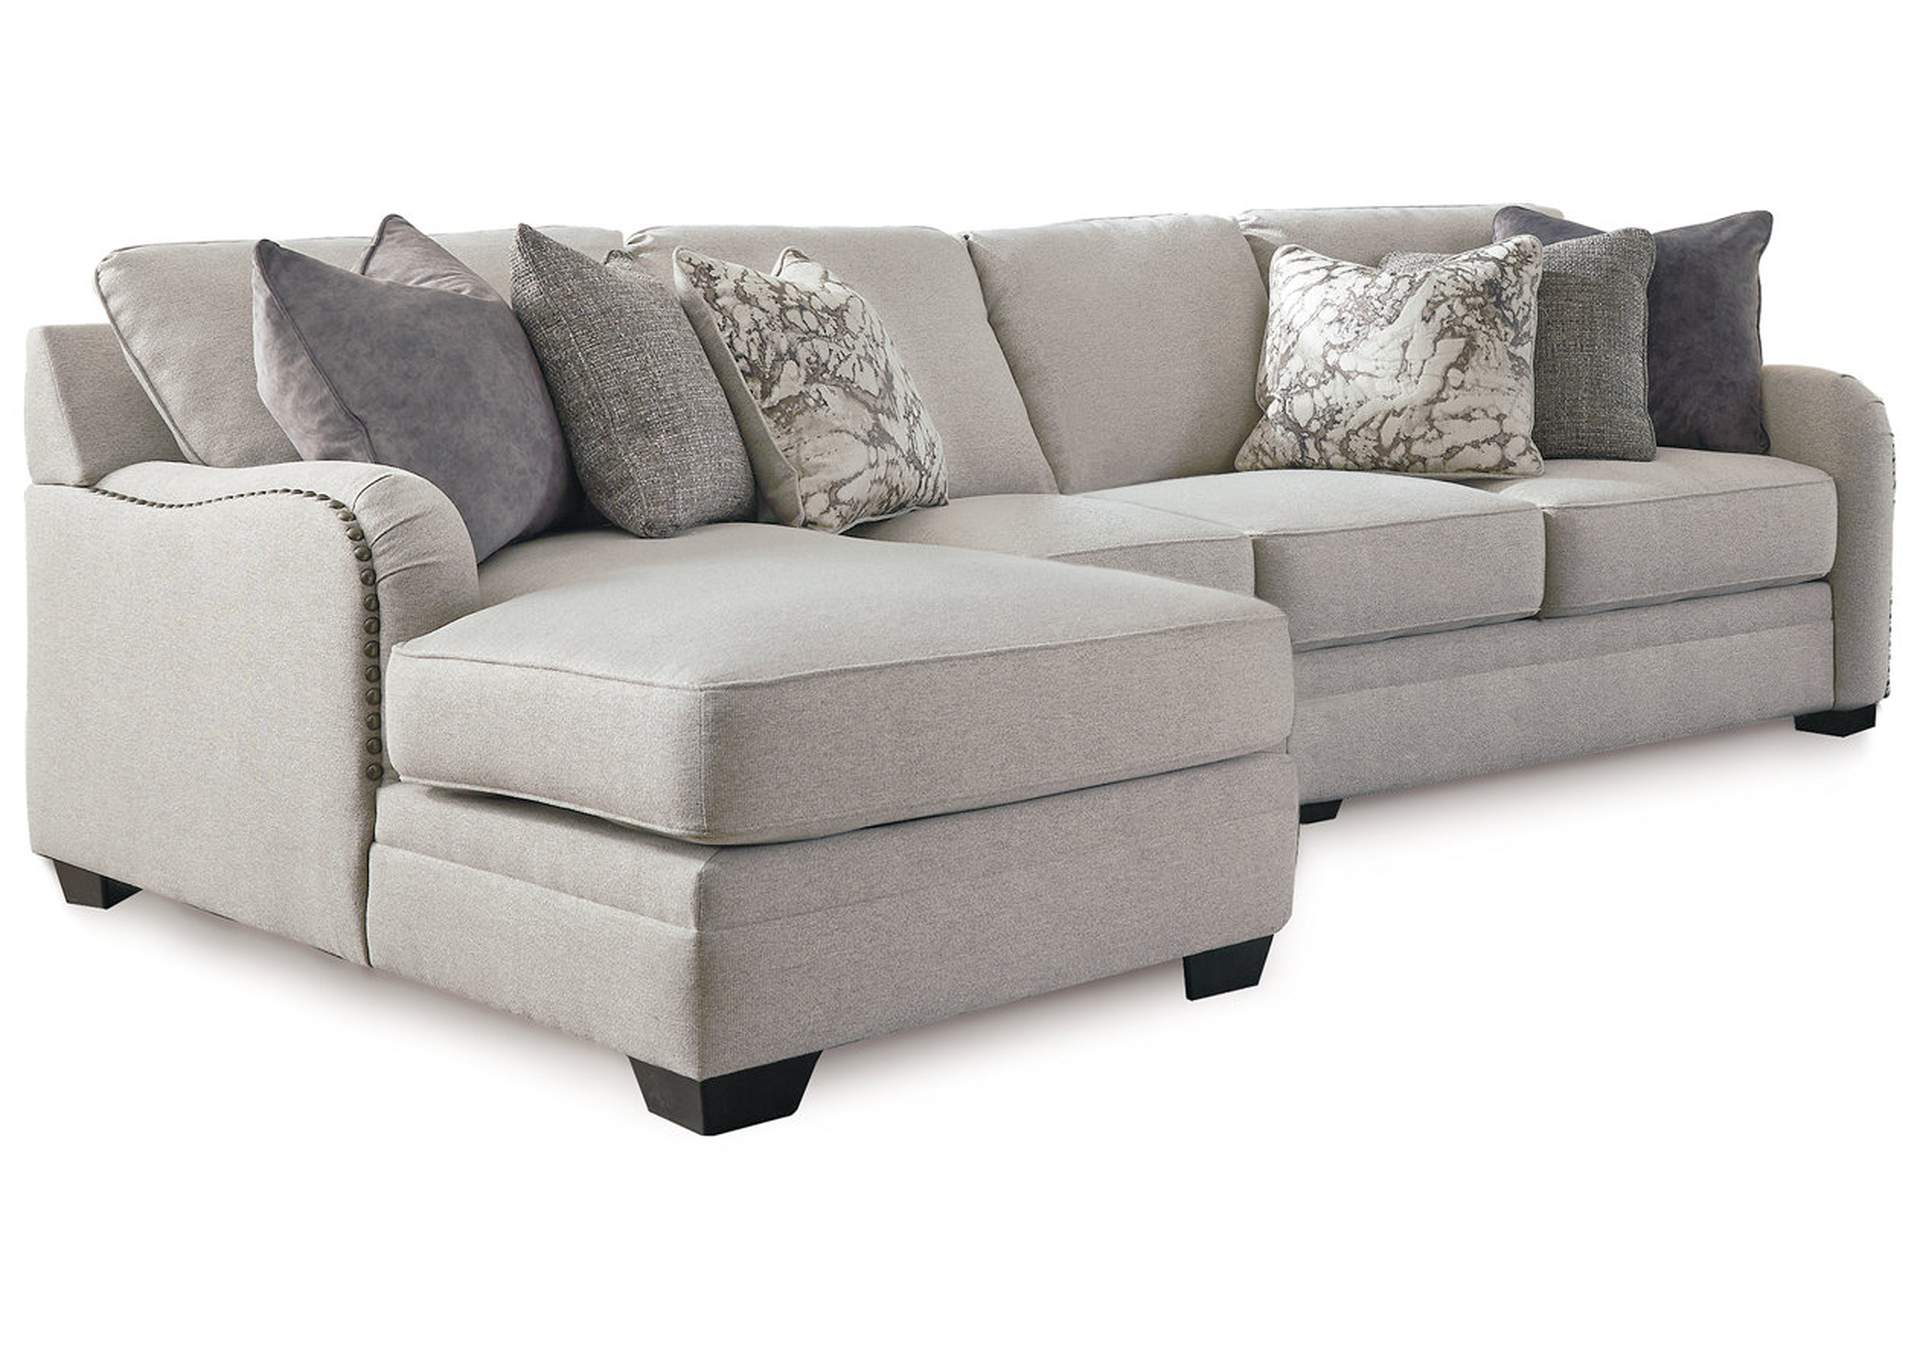 Dellara 3-Piece Sectional with Chaise,Benchcraft